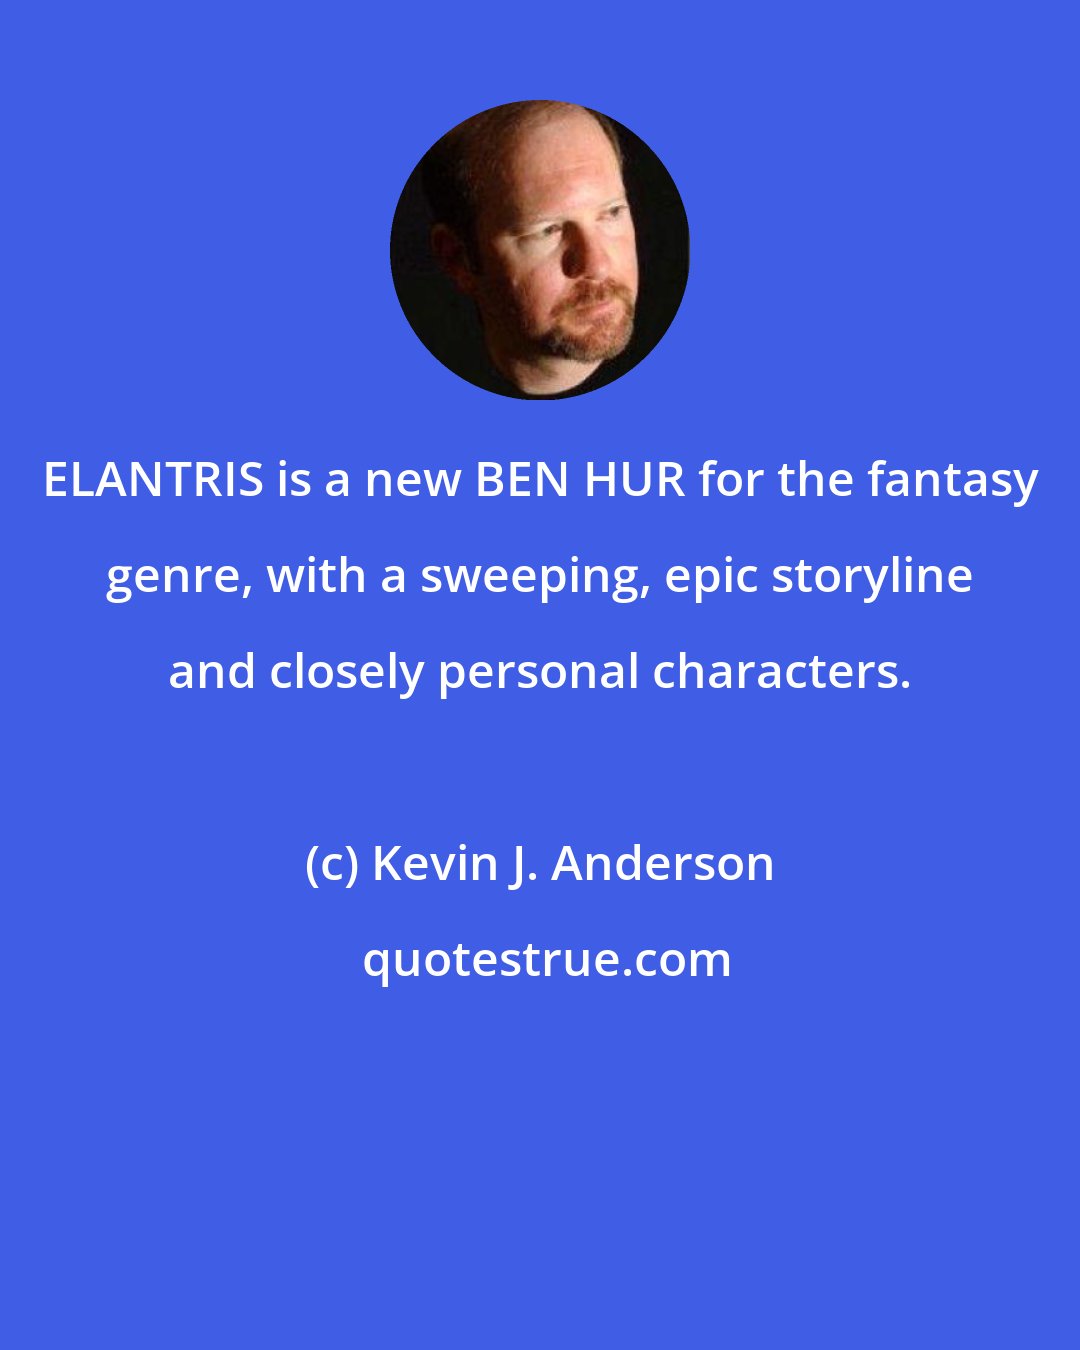 Kevin J. Anderson: ELANTRIS is a new BEN HUR for the fantasy genre, with a sweeping, epic storyline and closely personal characters.